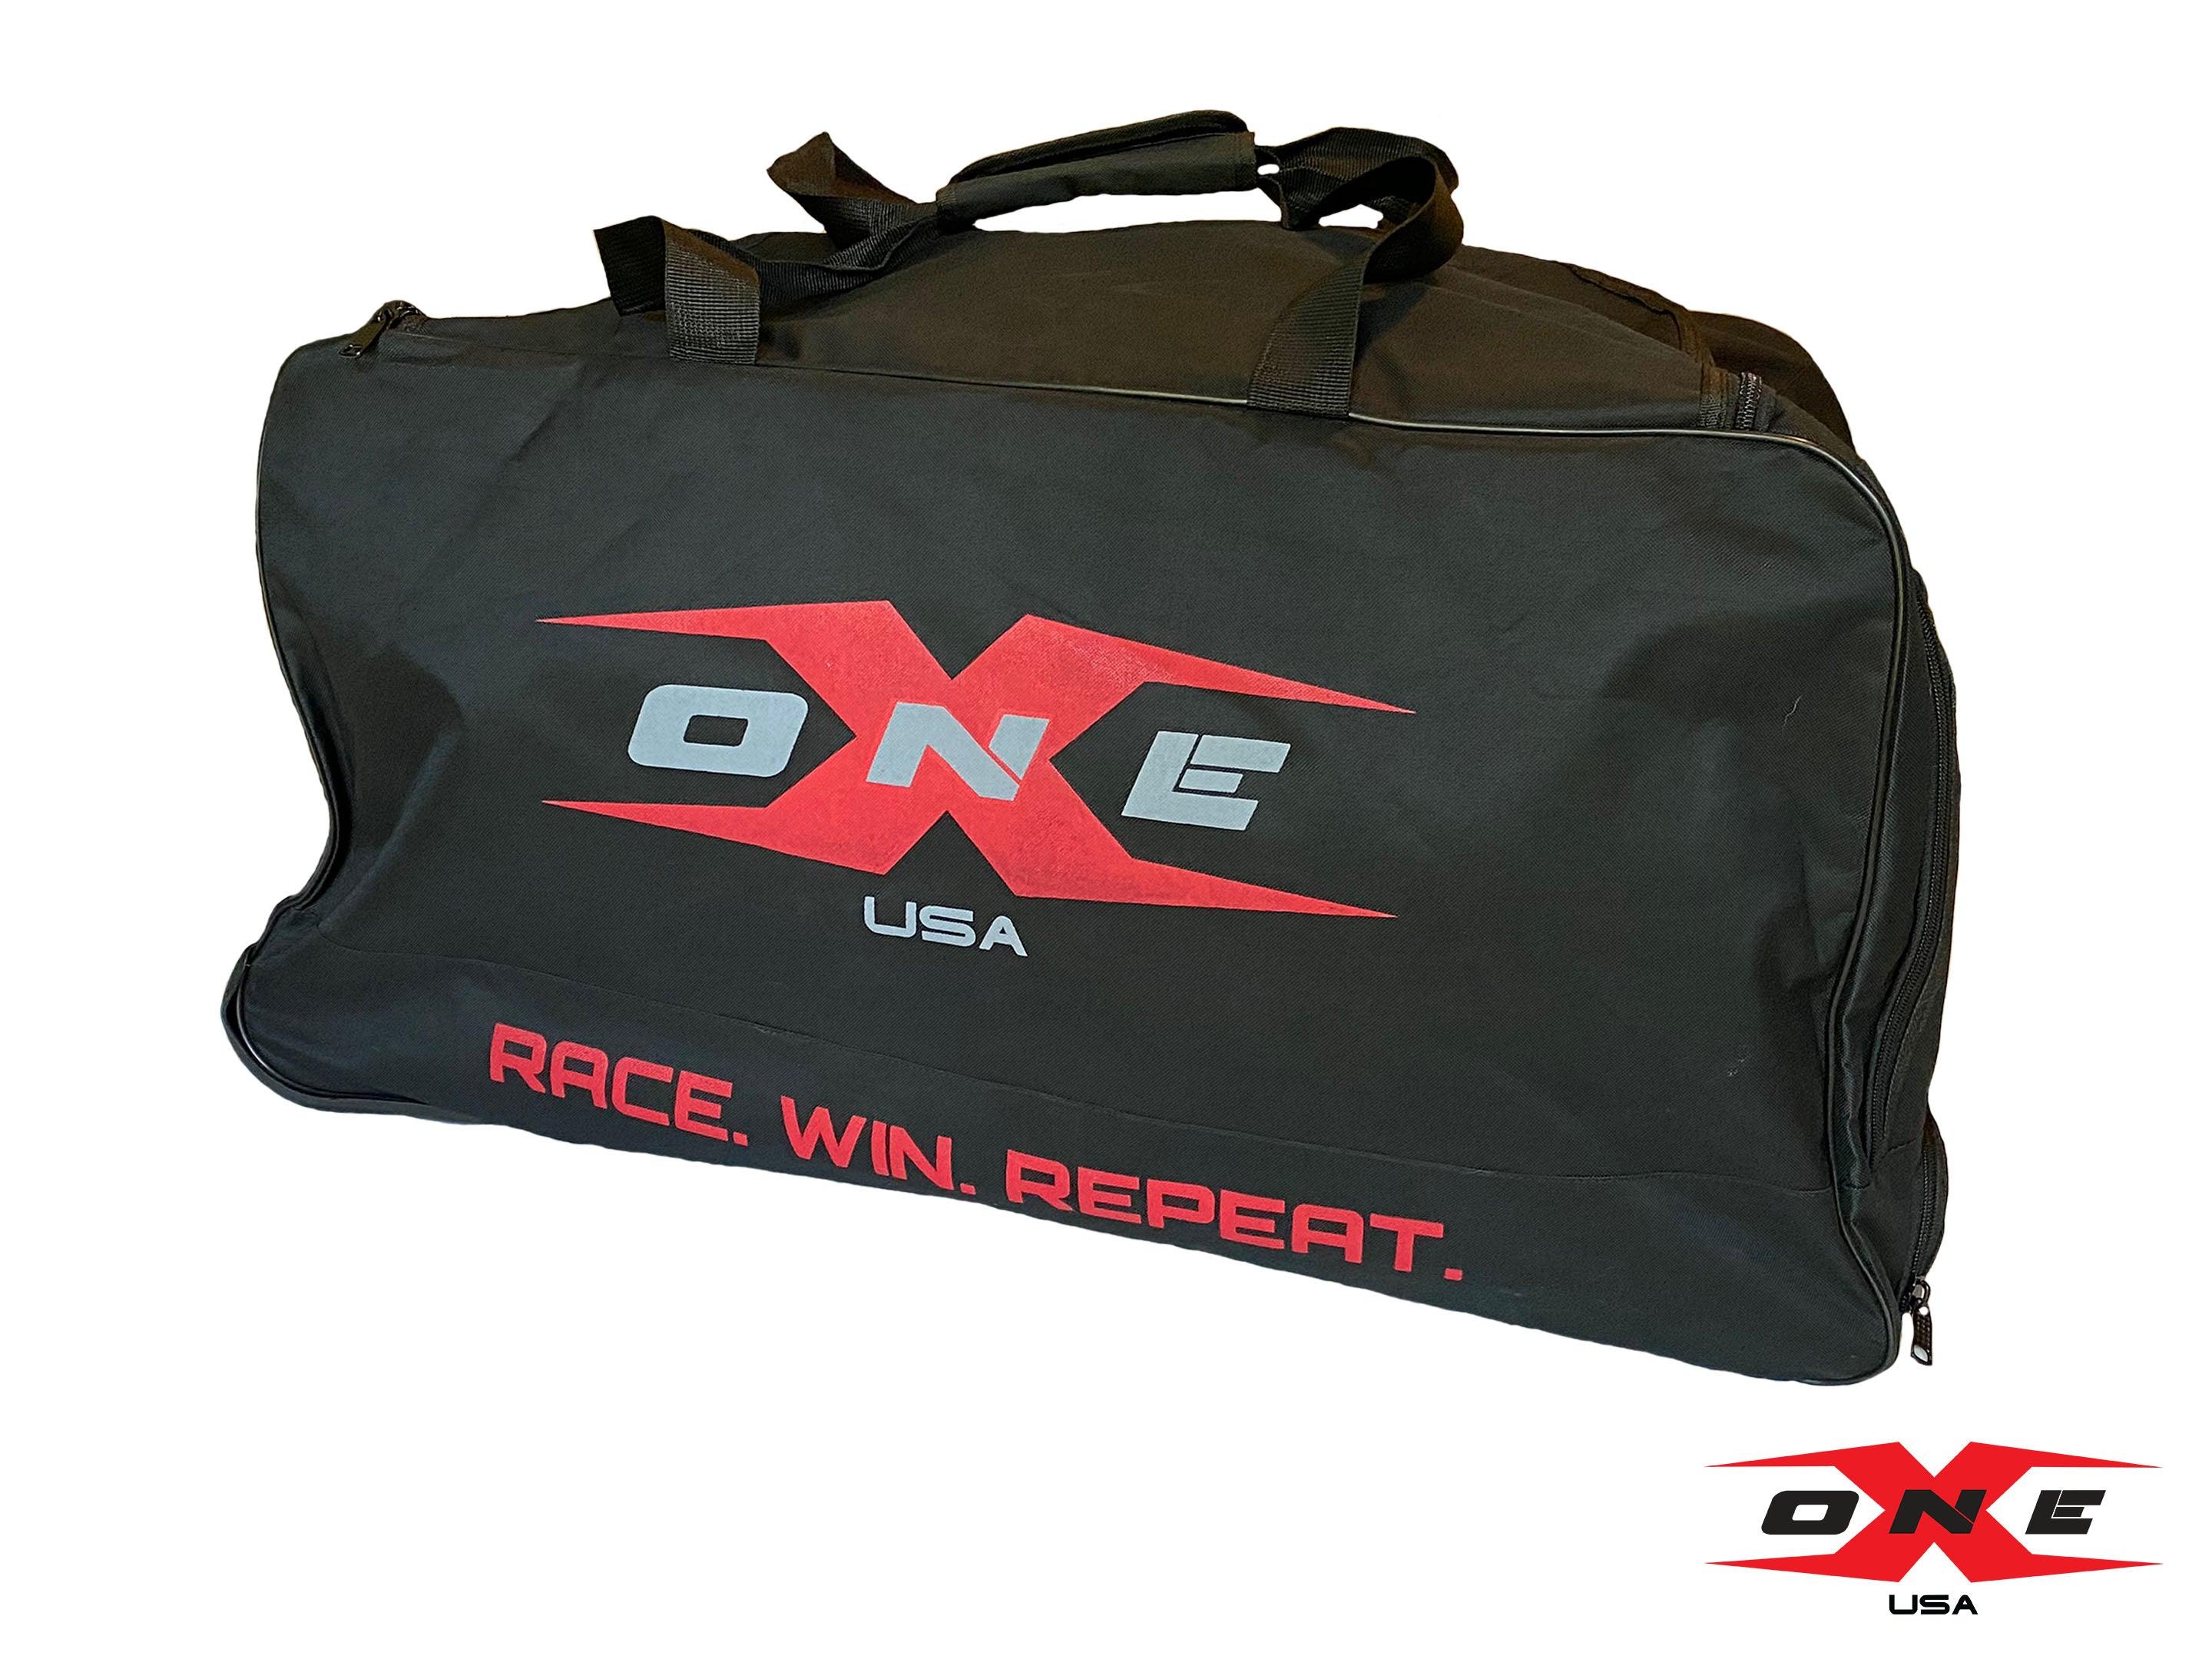 Gear and Travel Bags - OneX USA